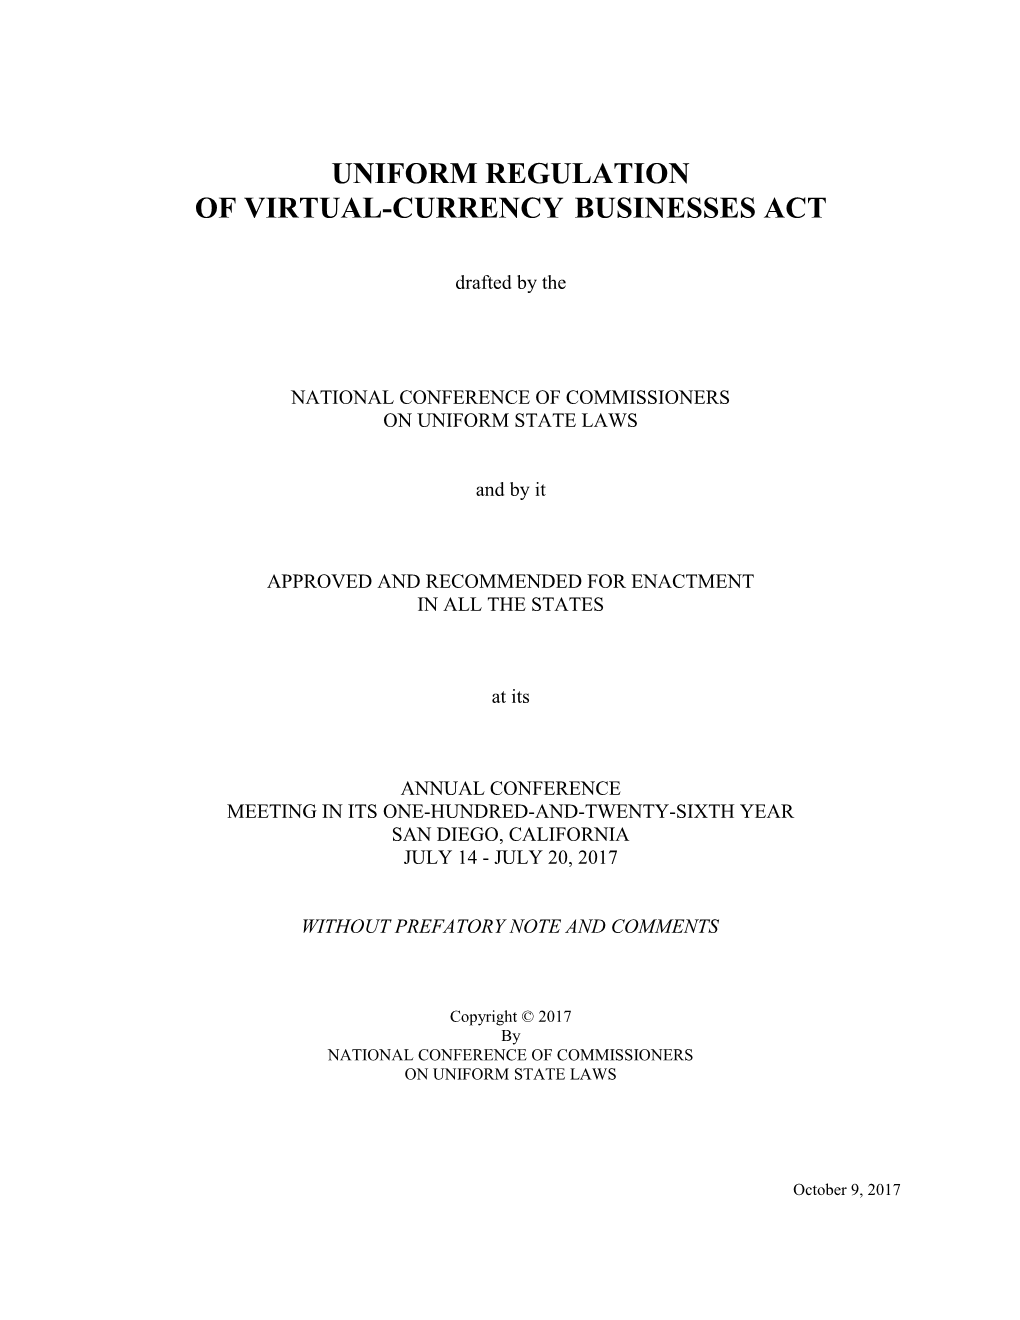 Of Virtual-Currency Businesses Act